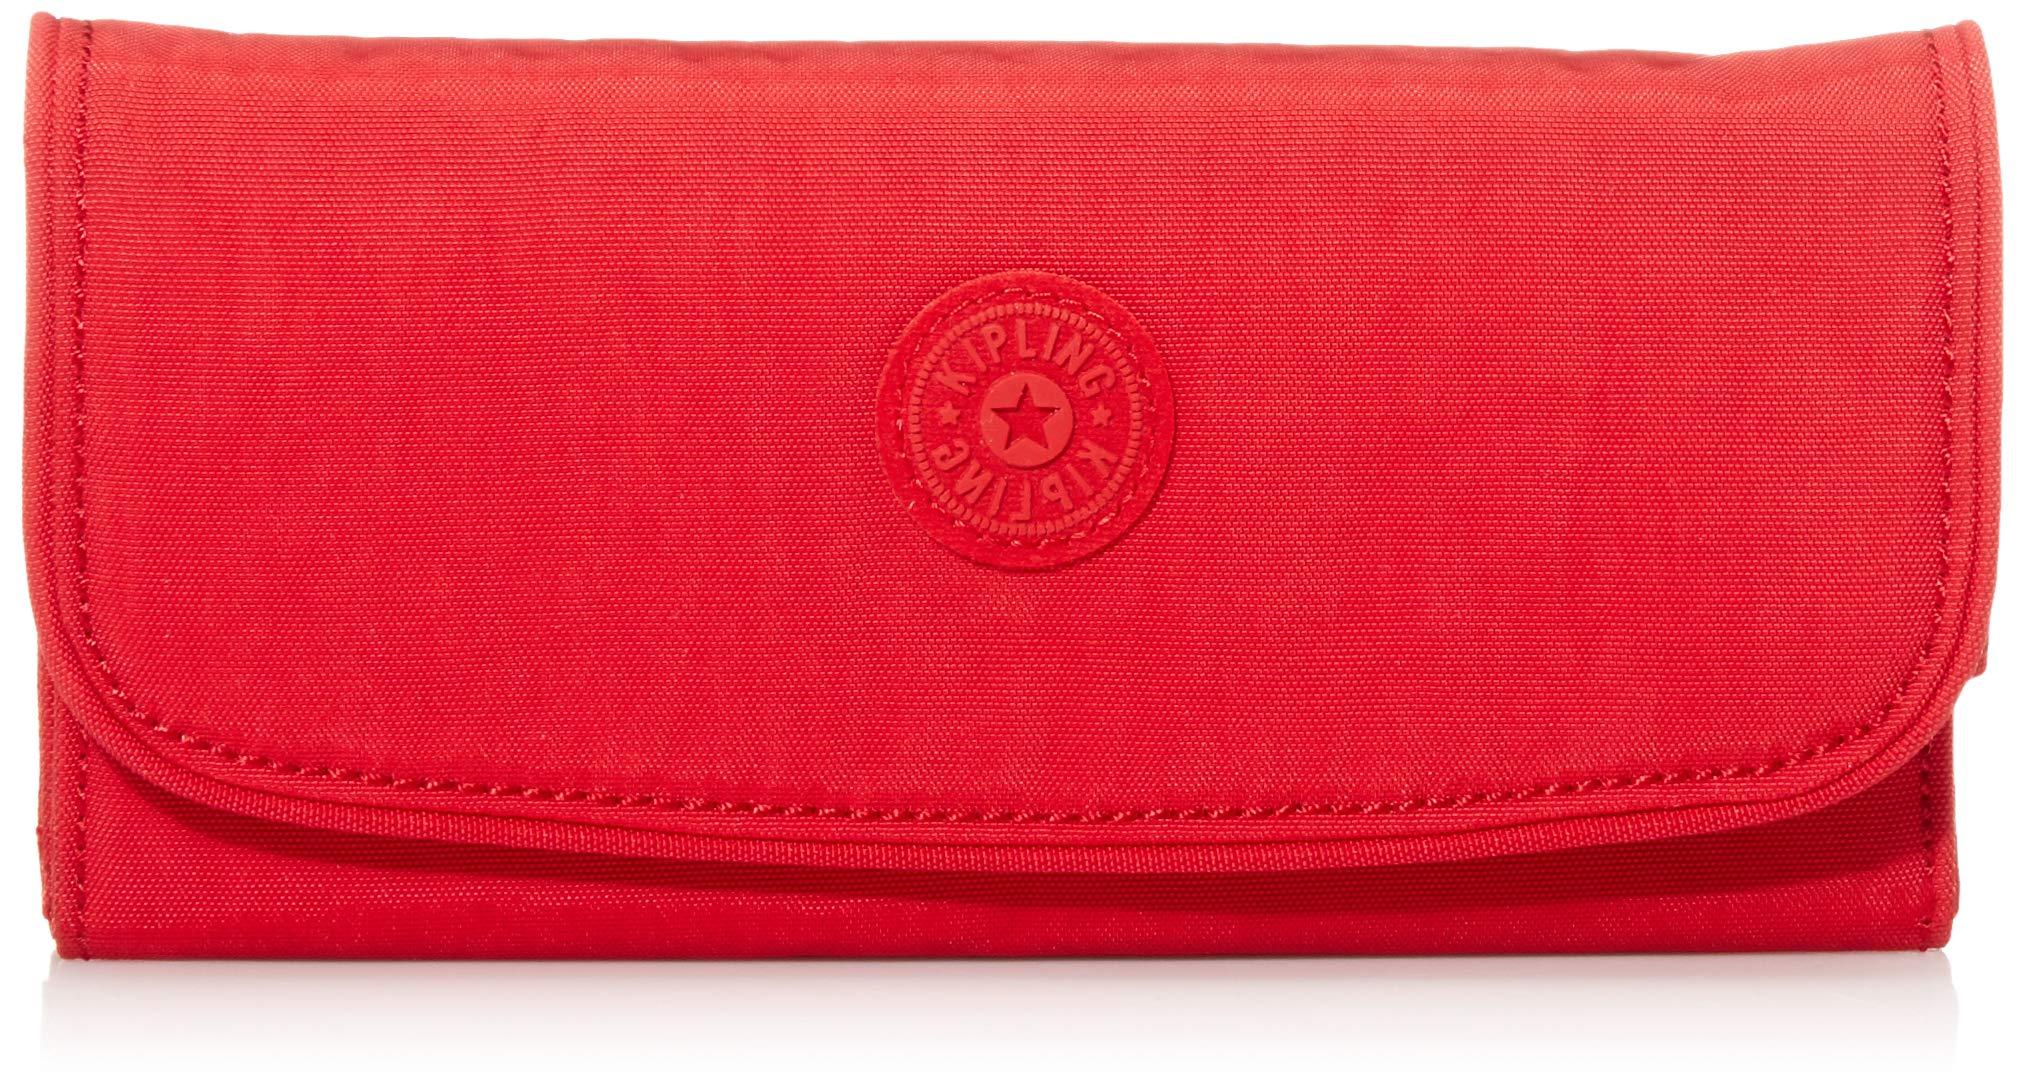 Kipling Synthetic Money Land in Red - Save 10% - Lyst